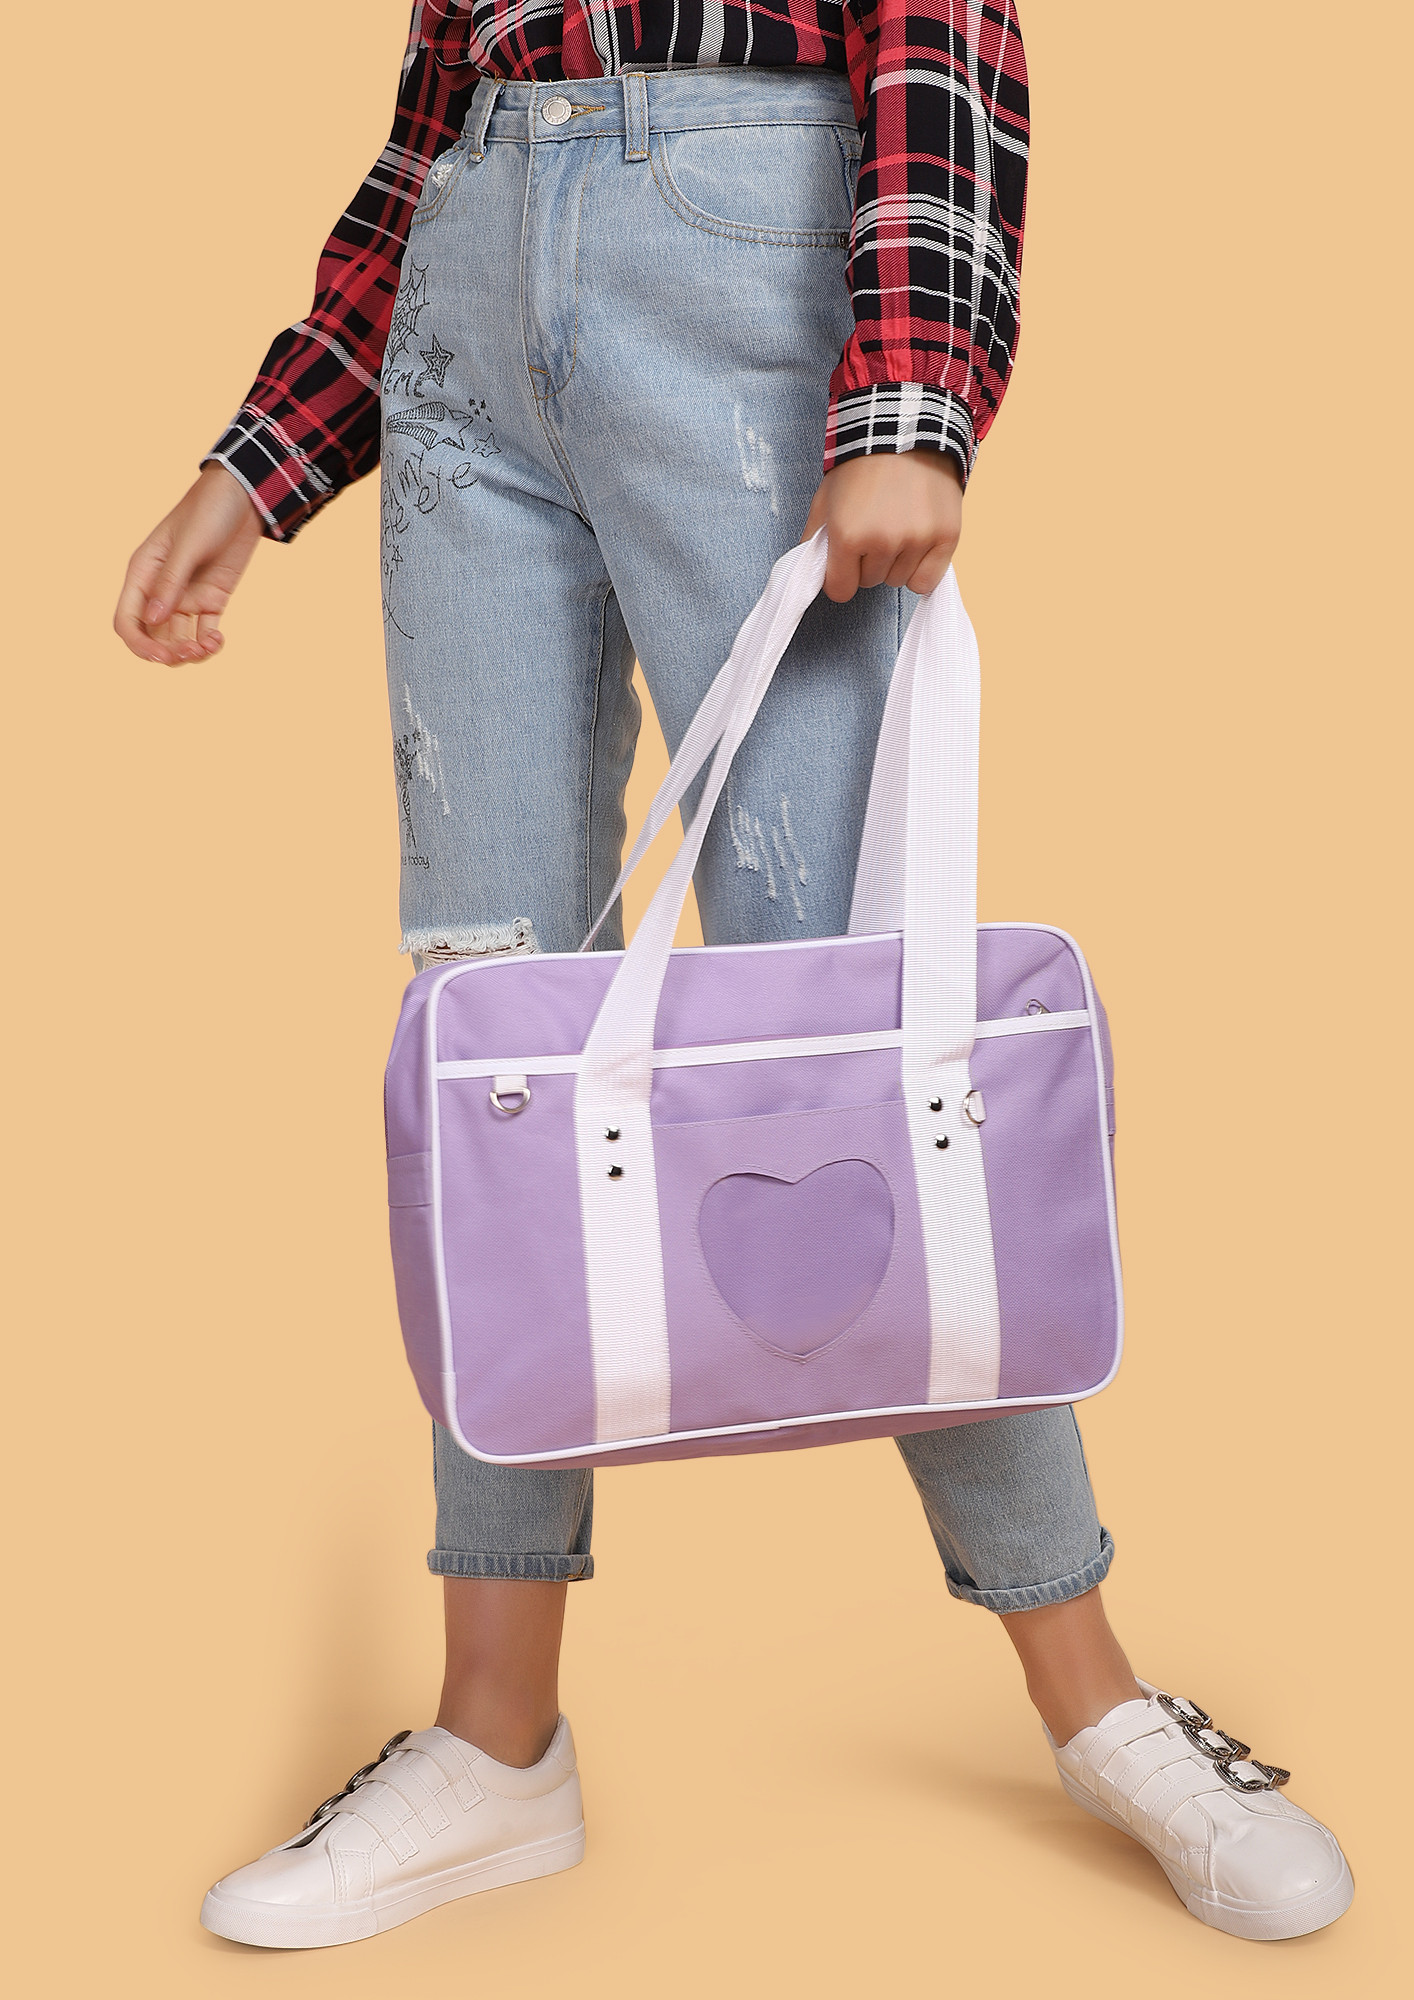 GOING FOR A PURPLE TOTE BAG